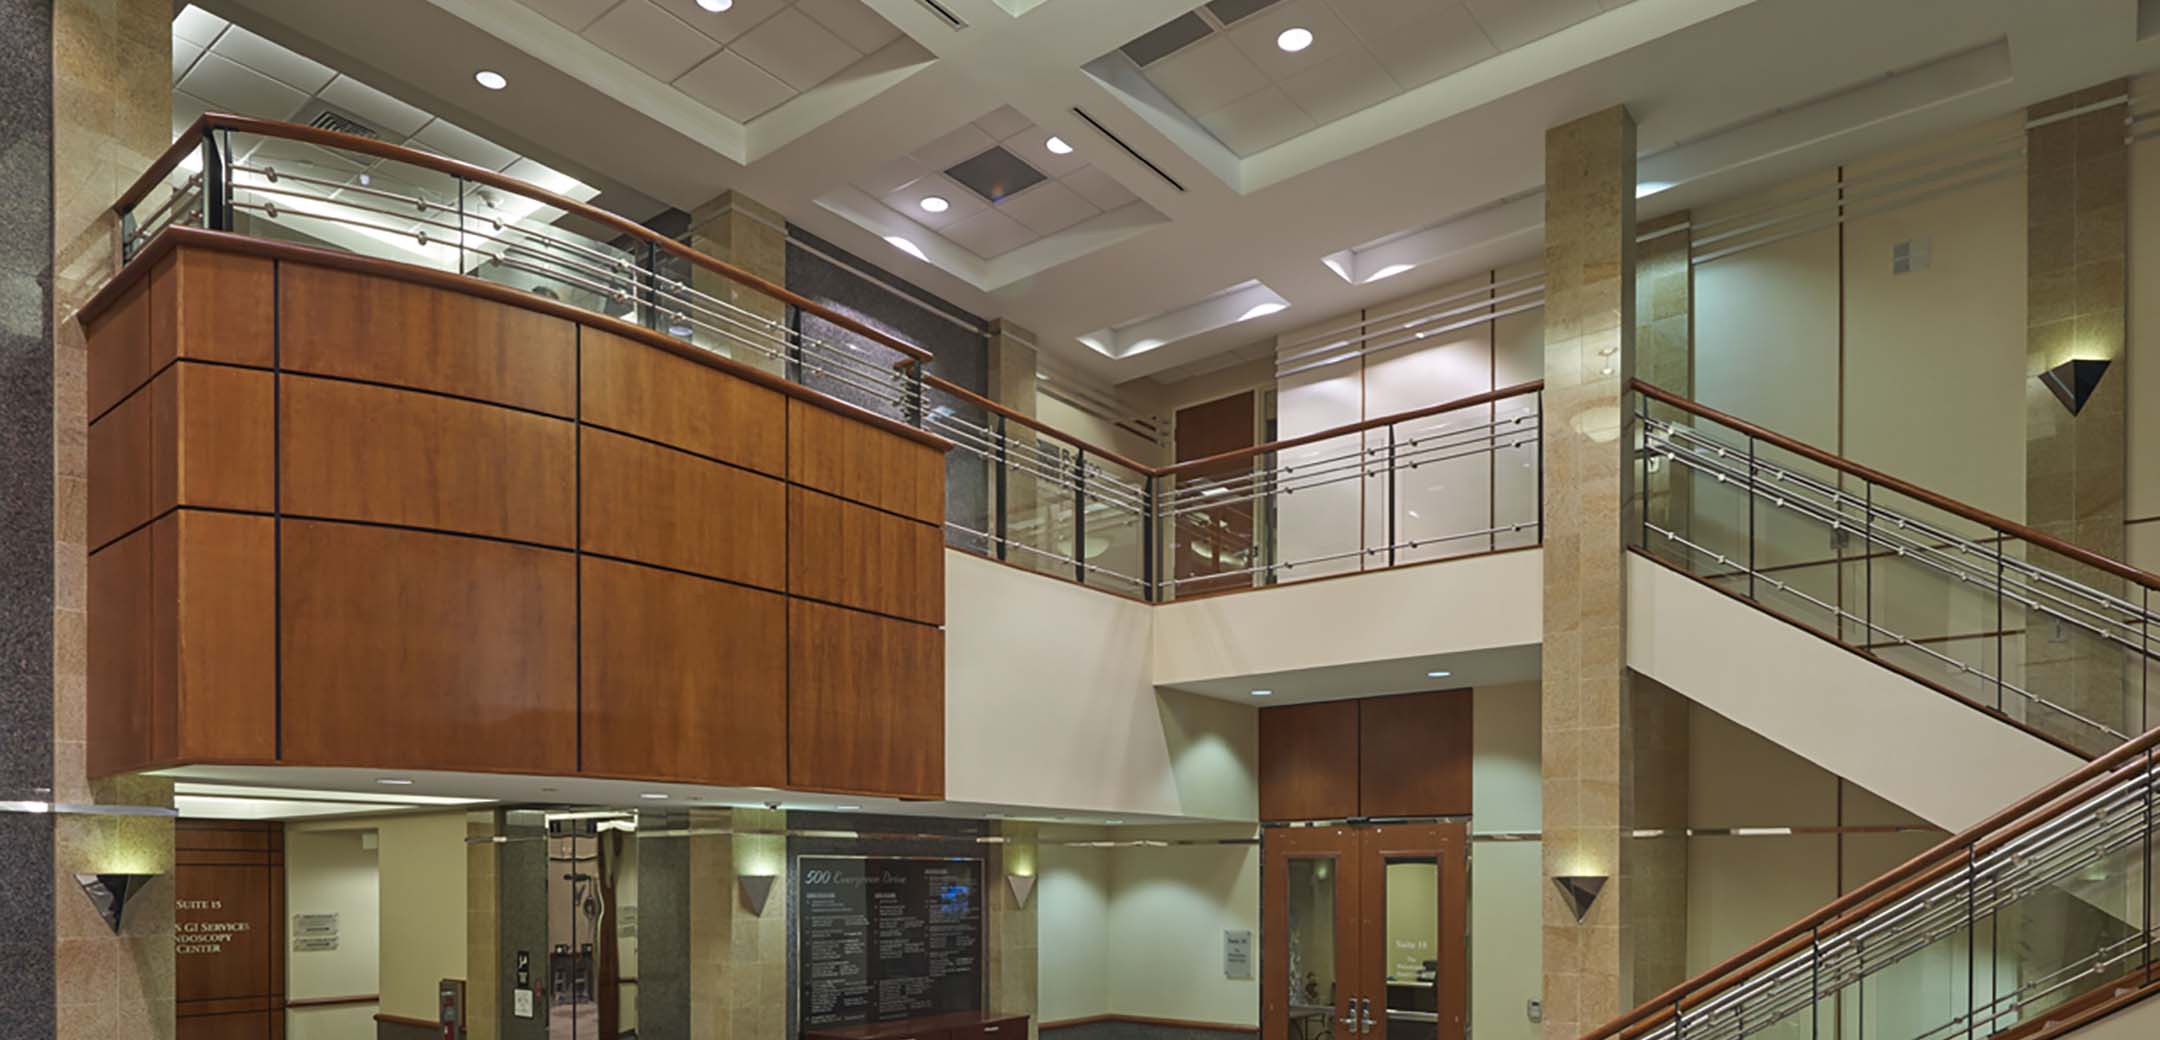 An interior view of the Rothman Brinton Lakes building showcasing the second floor balcony and staircase leading down to the first floor.